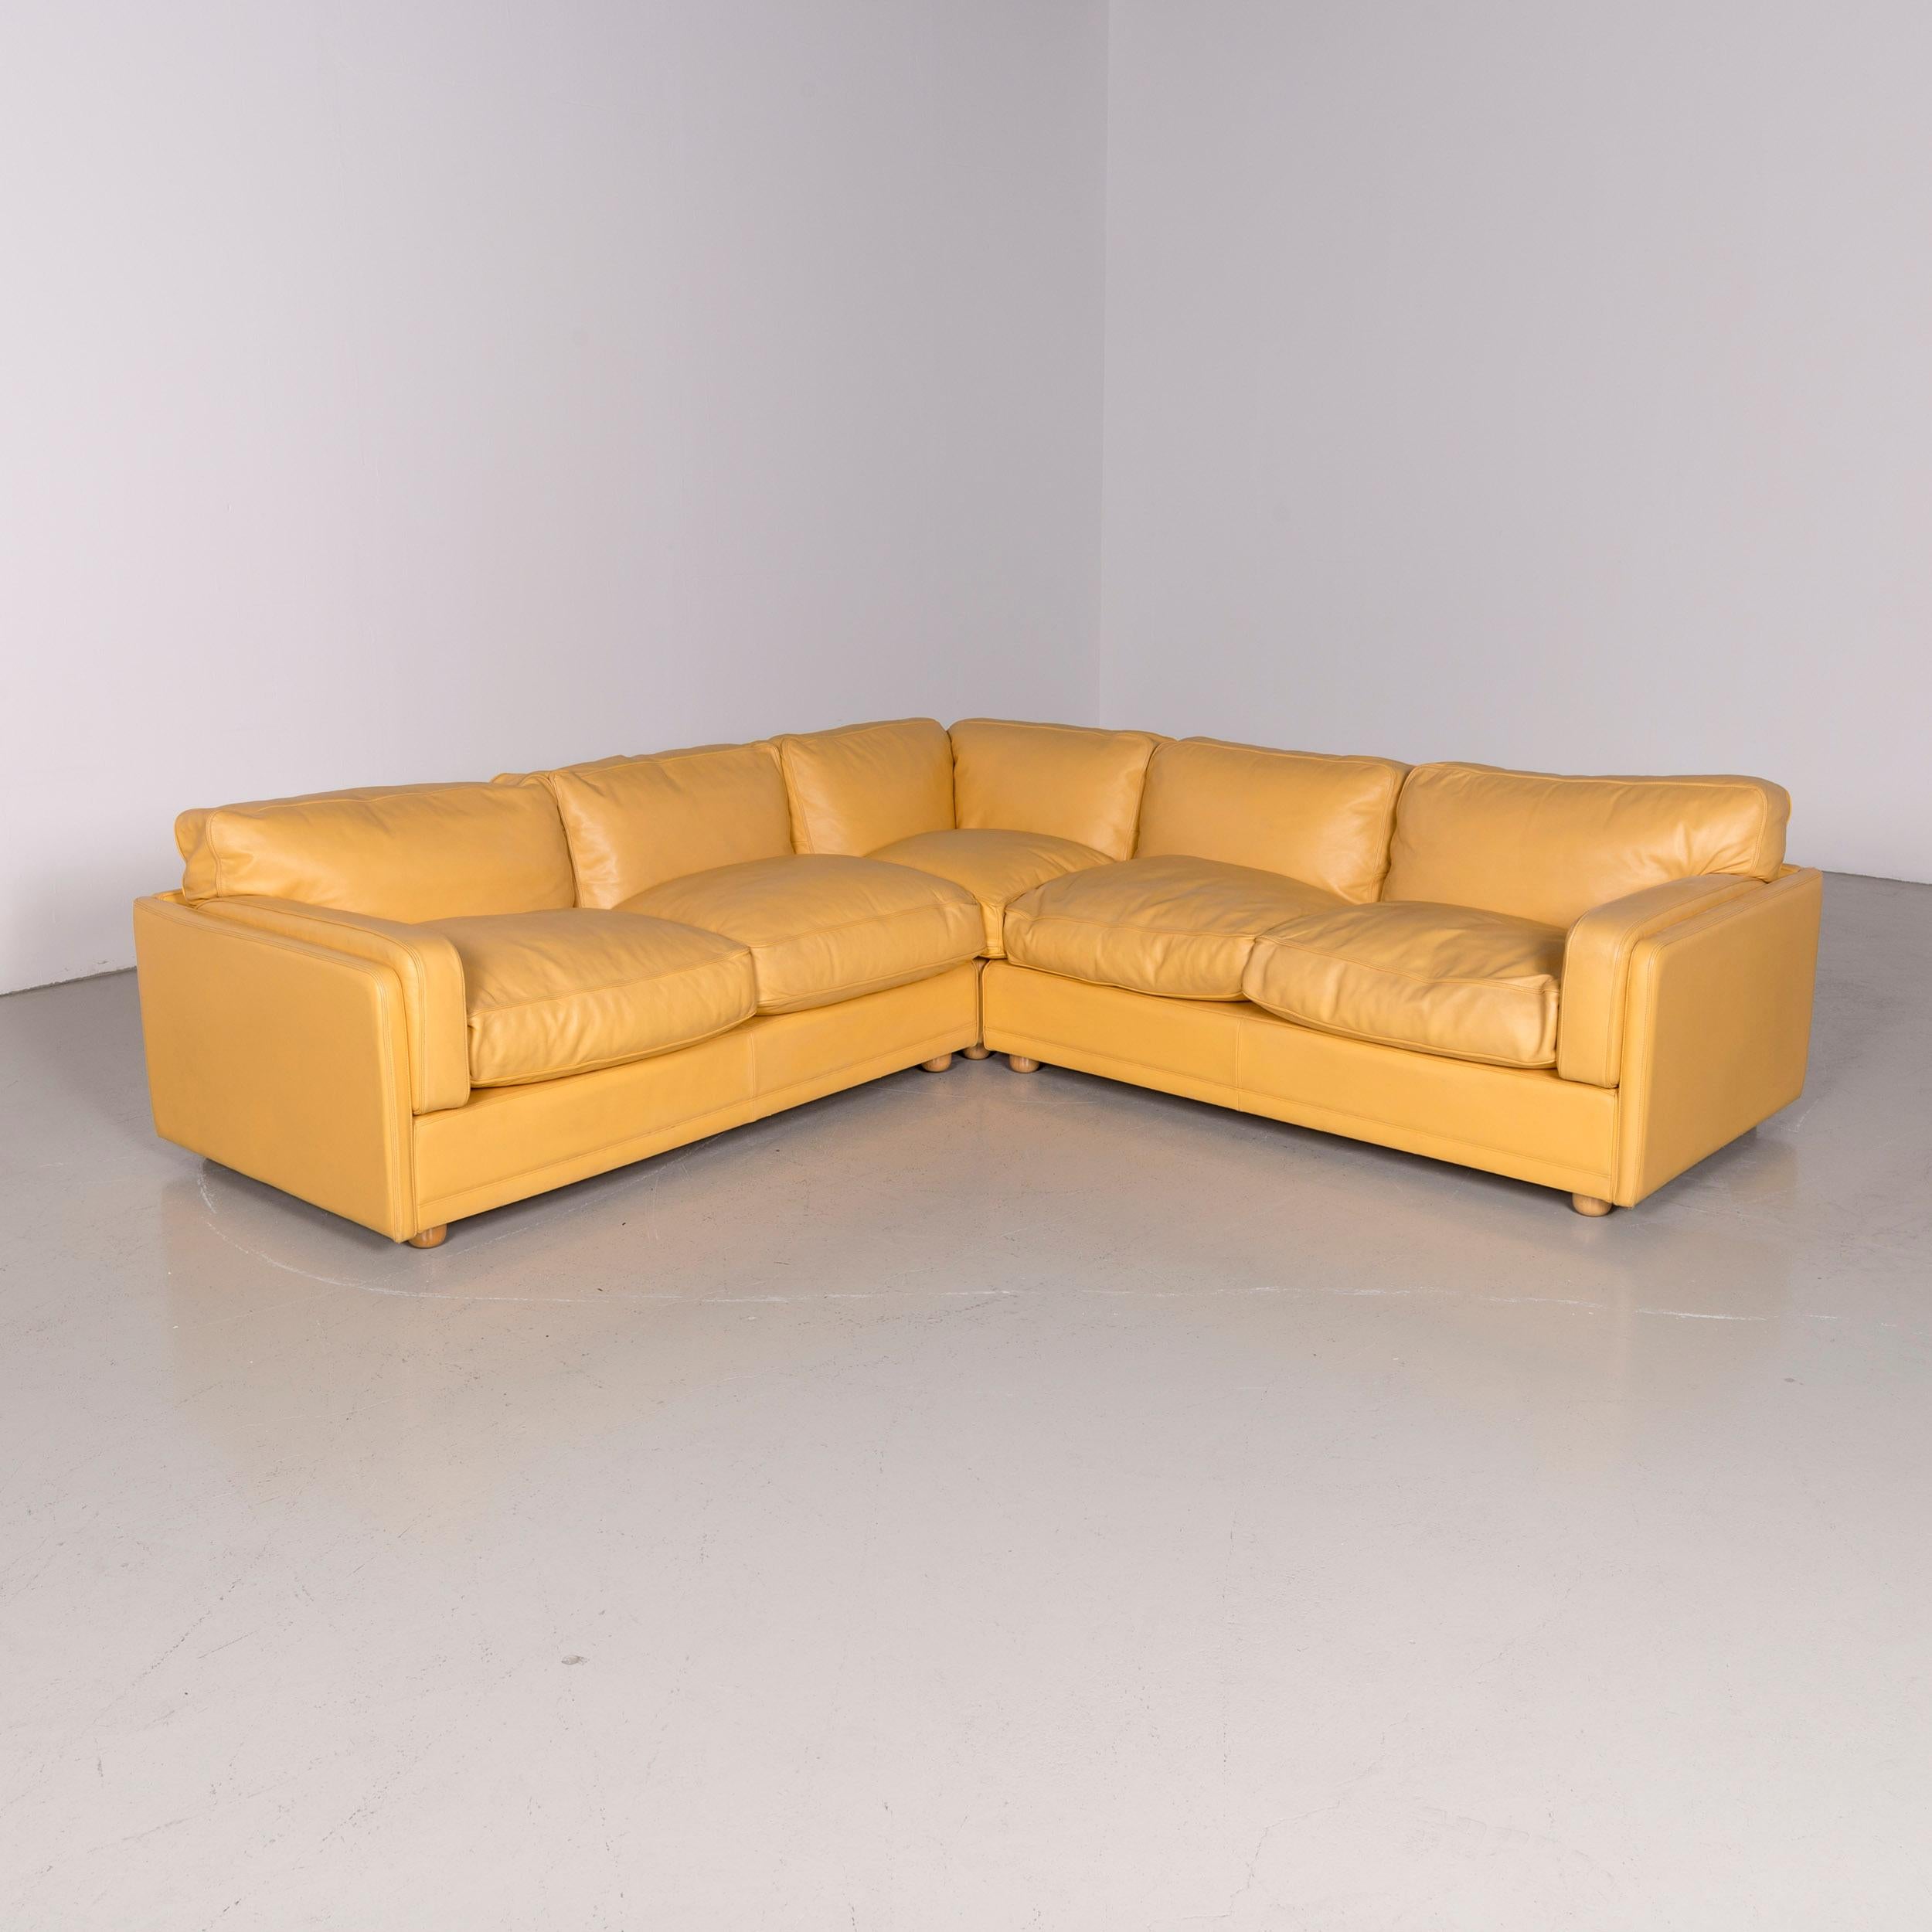 We bring to you a Poltrona Frau designer leather corner sofa yellow genuine leather sofa couch.

Product measurements in centimeters:

Depth 90
Width 250
Height 70
Seat-height 45
Rest-height 60
Seat-depth 50
Seat-width 190
Back-height